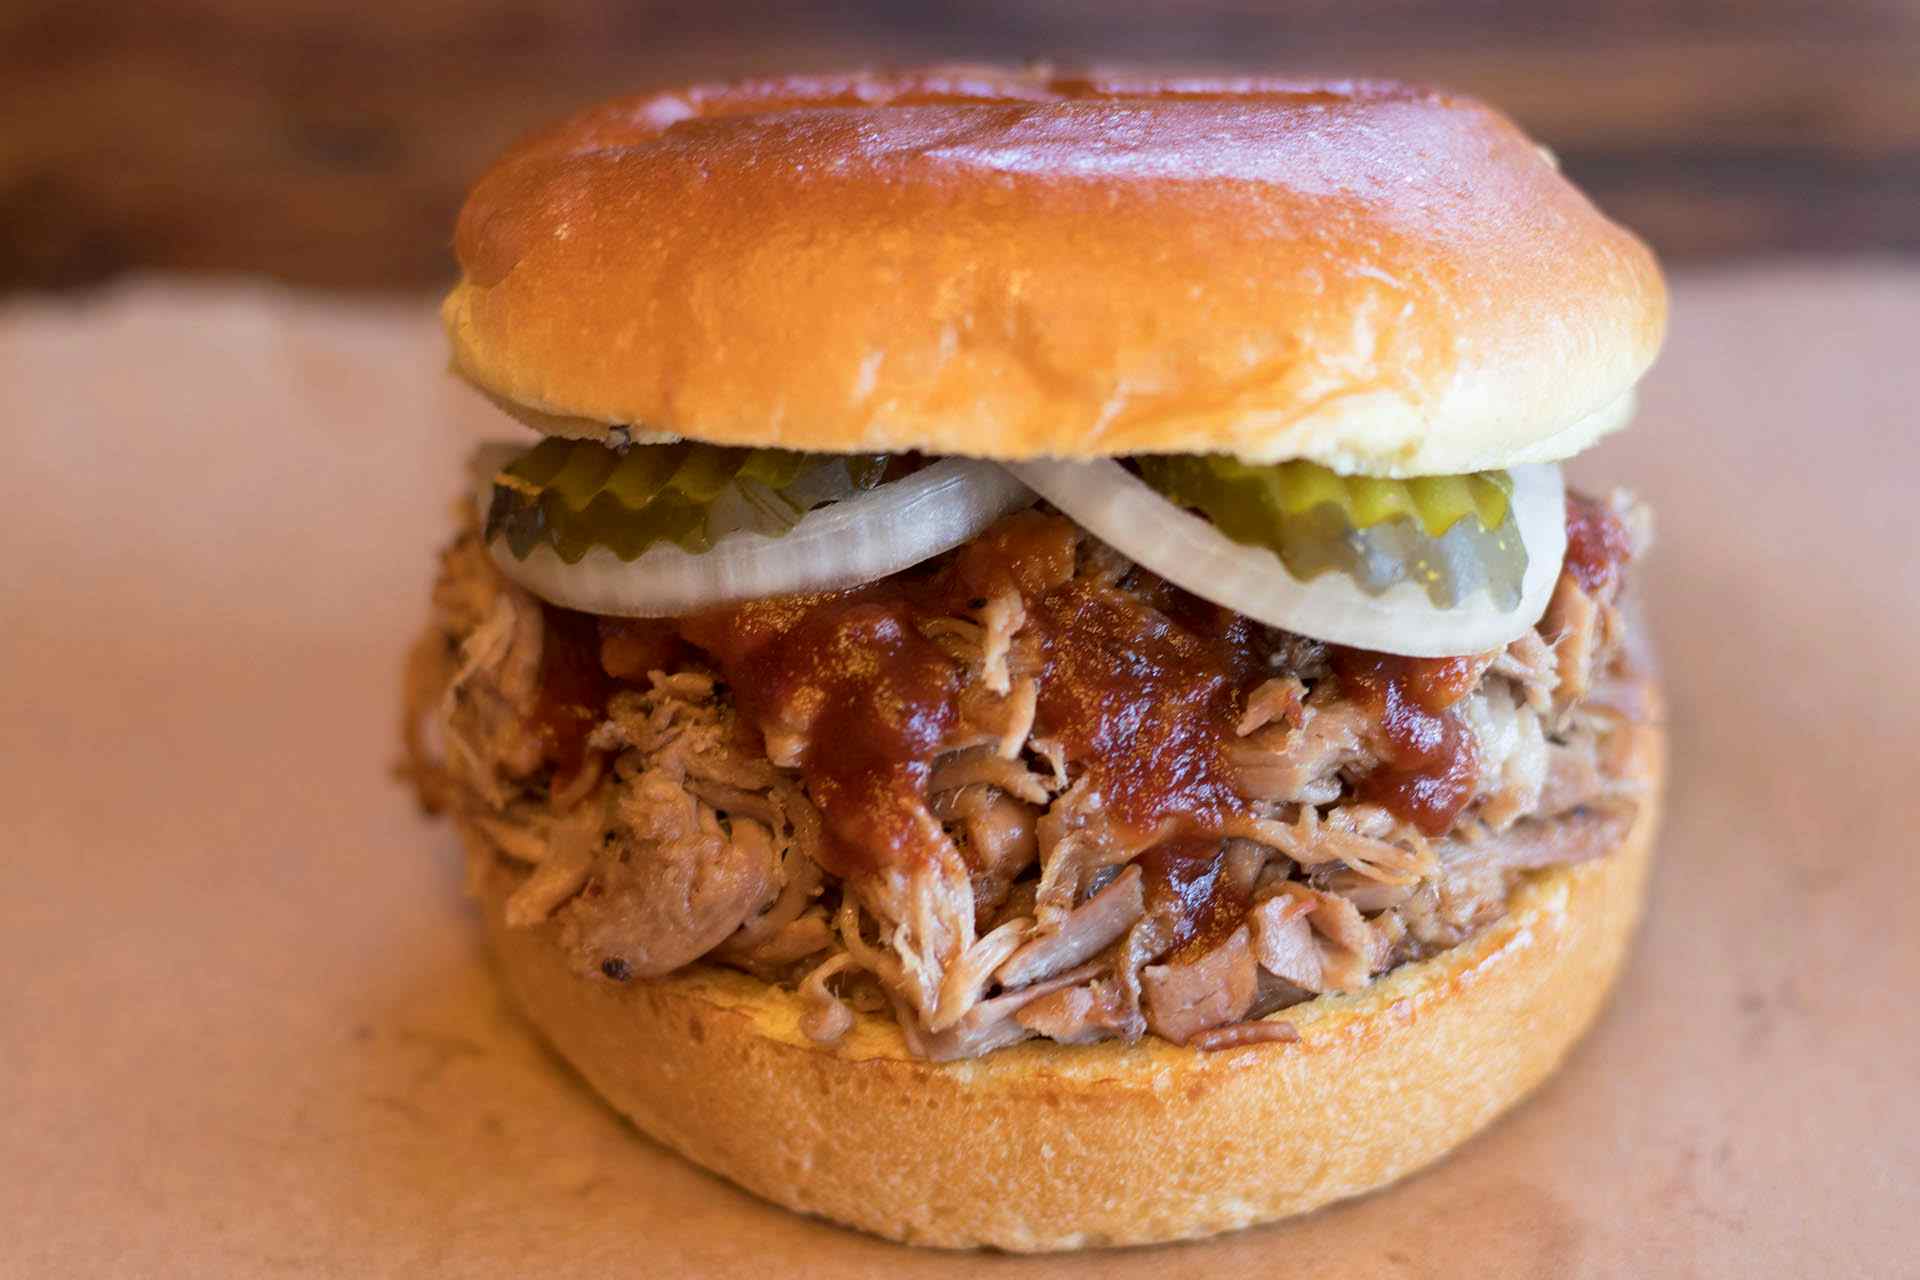 2015 Brings Tasty New Barbecue Option to Rocklin with Dickey’s Barbecue Pit